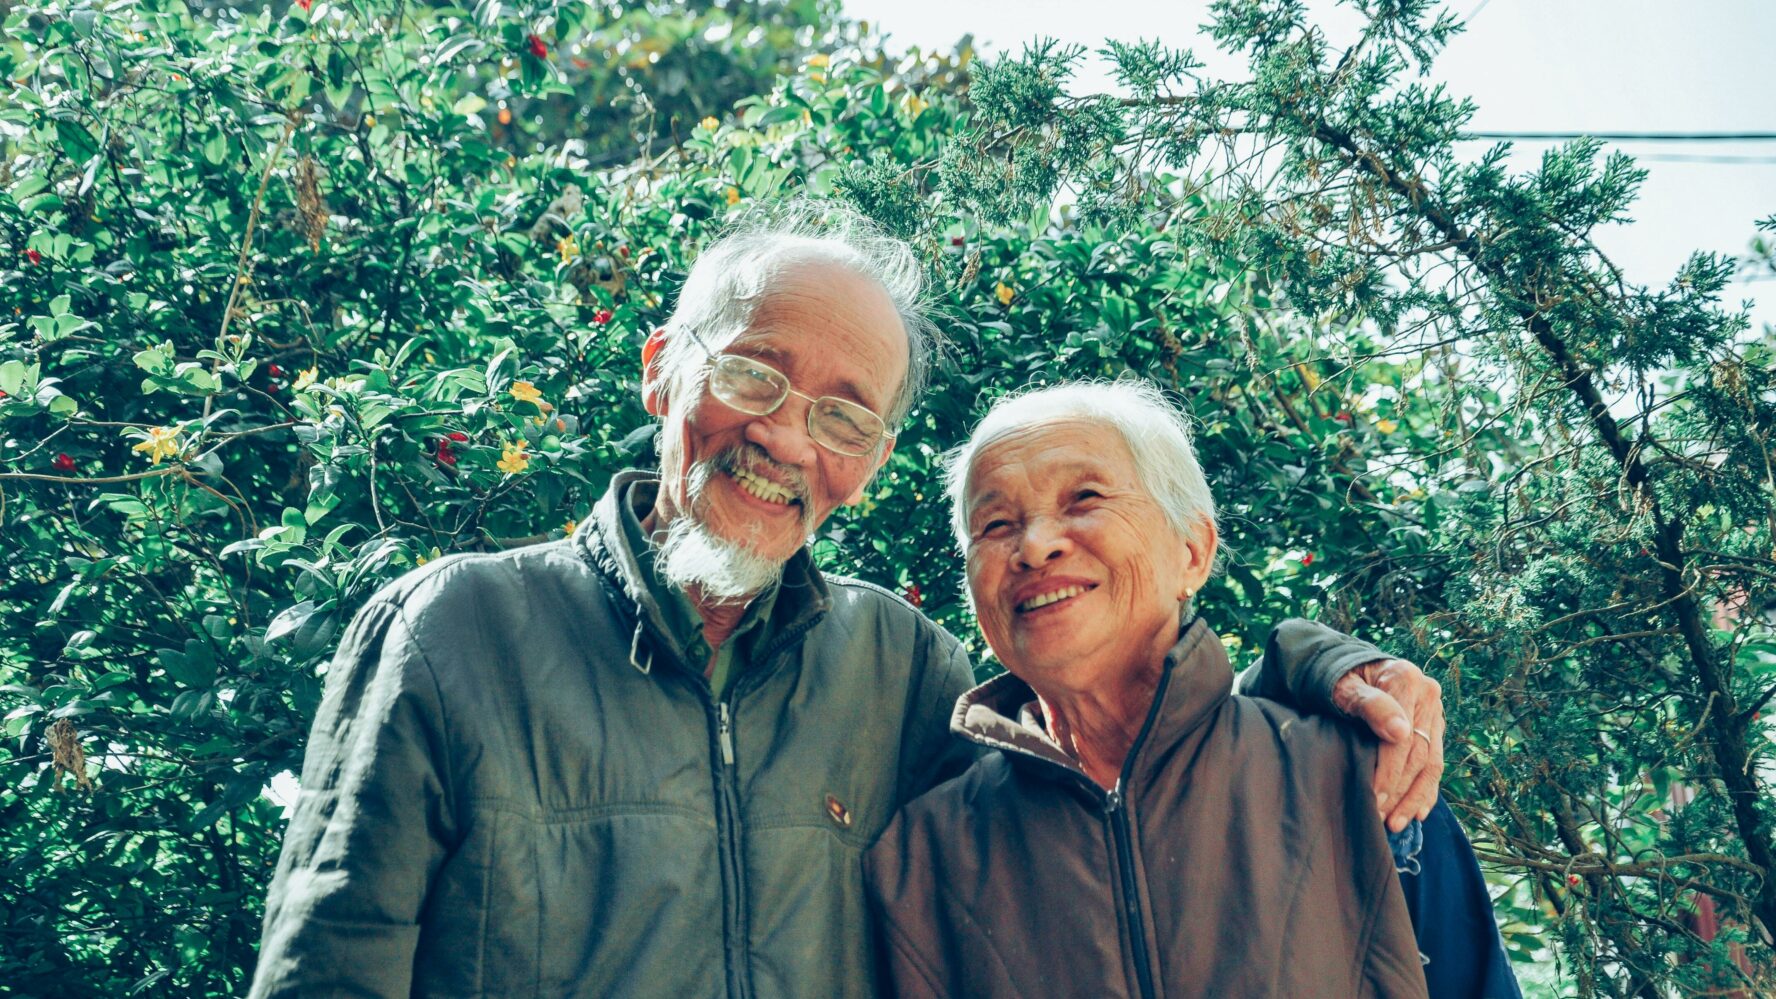 An older couple. Both of them are smiling at the camera.